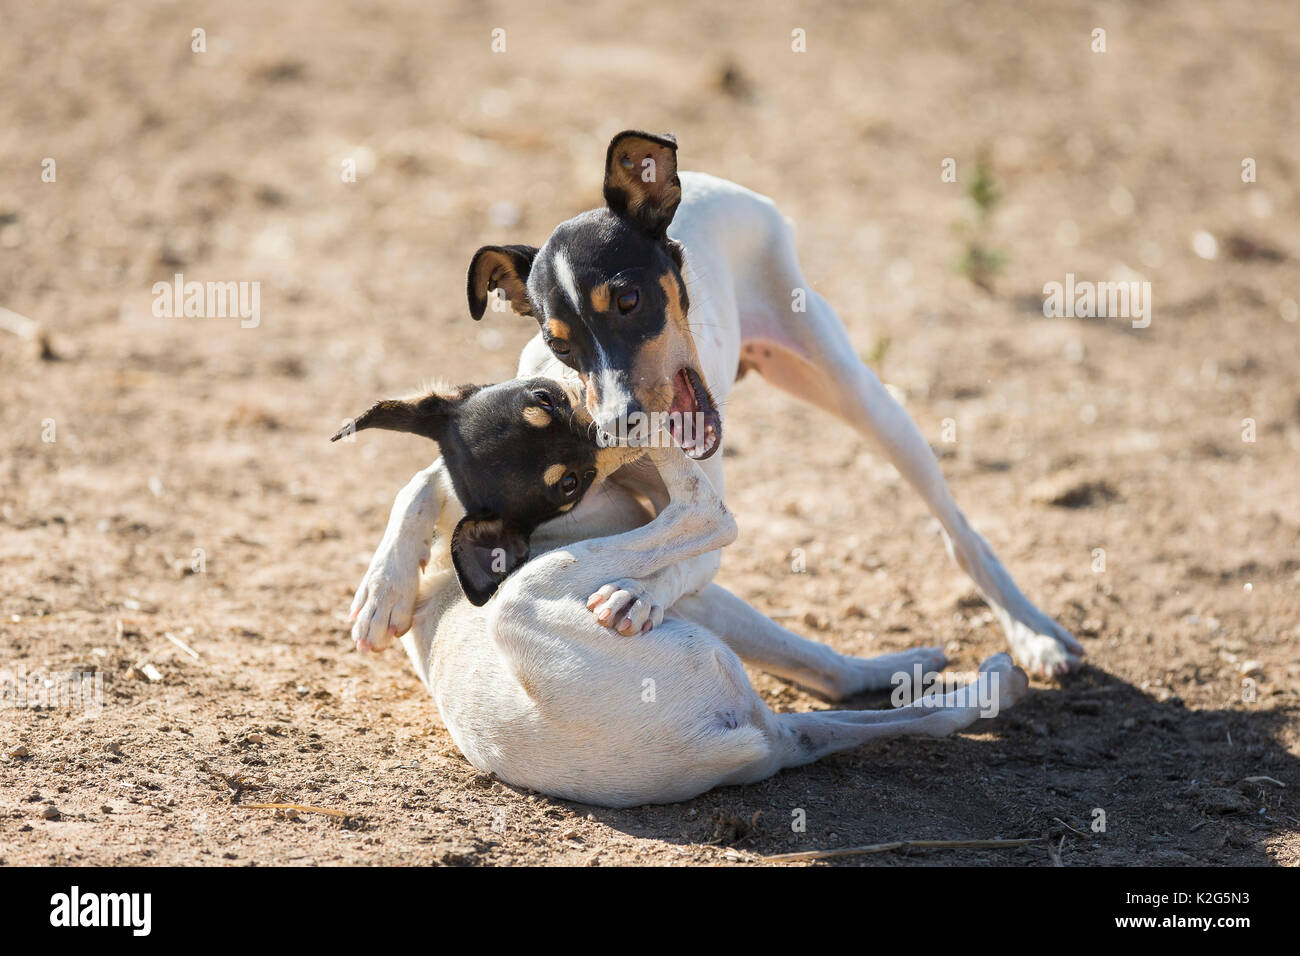 Ratonero Bodeguero Andaluz. Two adult dogs playing in the sand. Spain Stock Photo